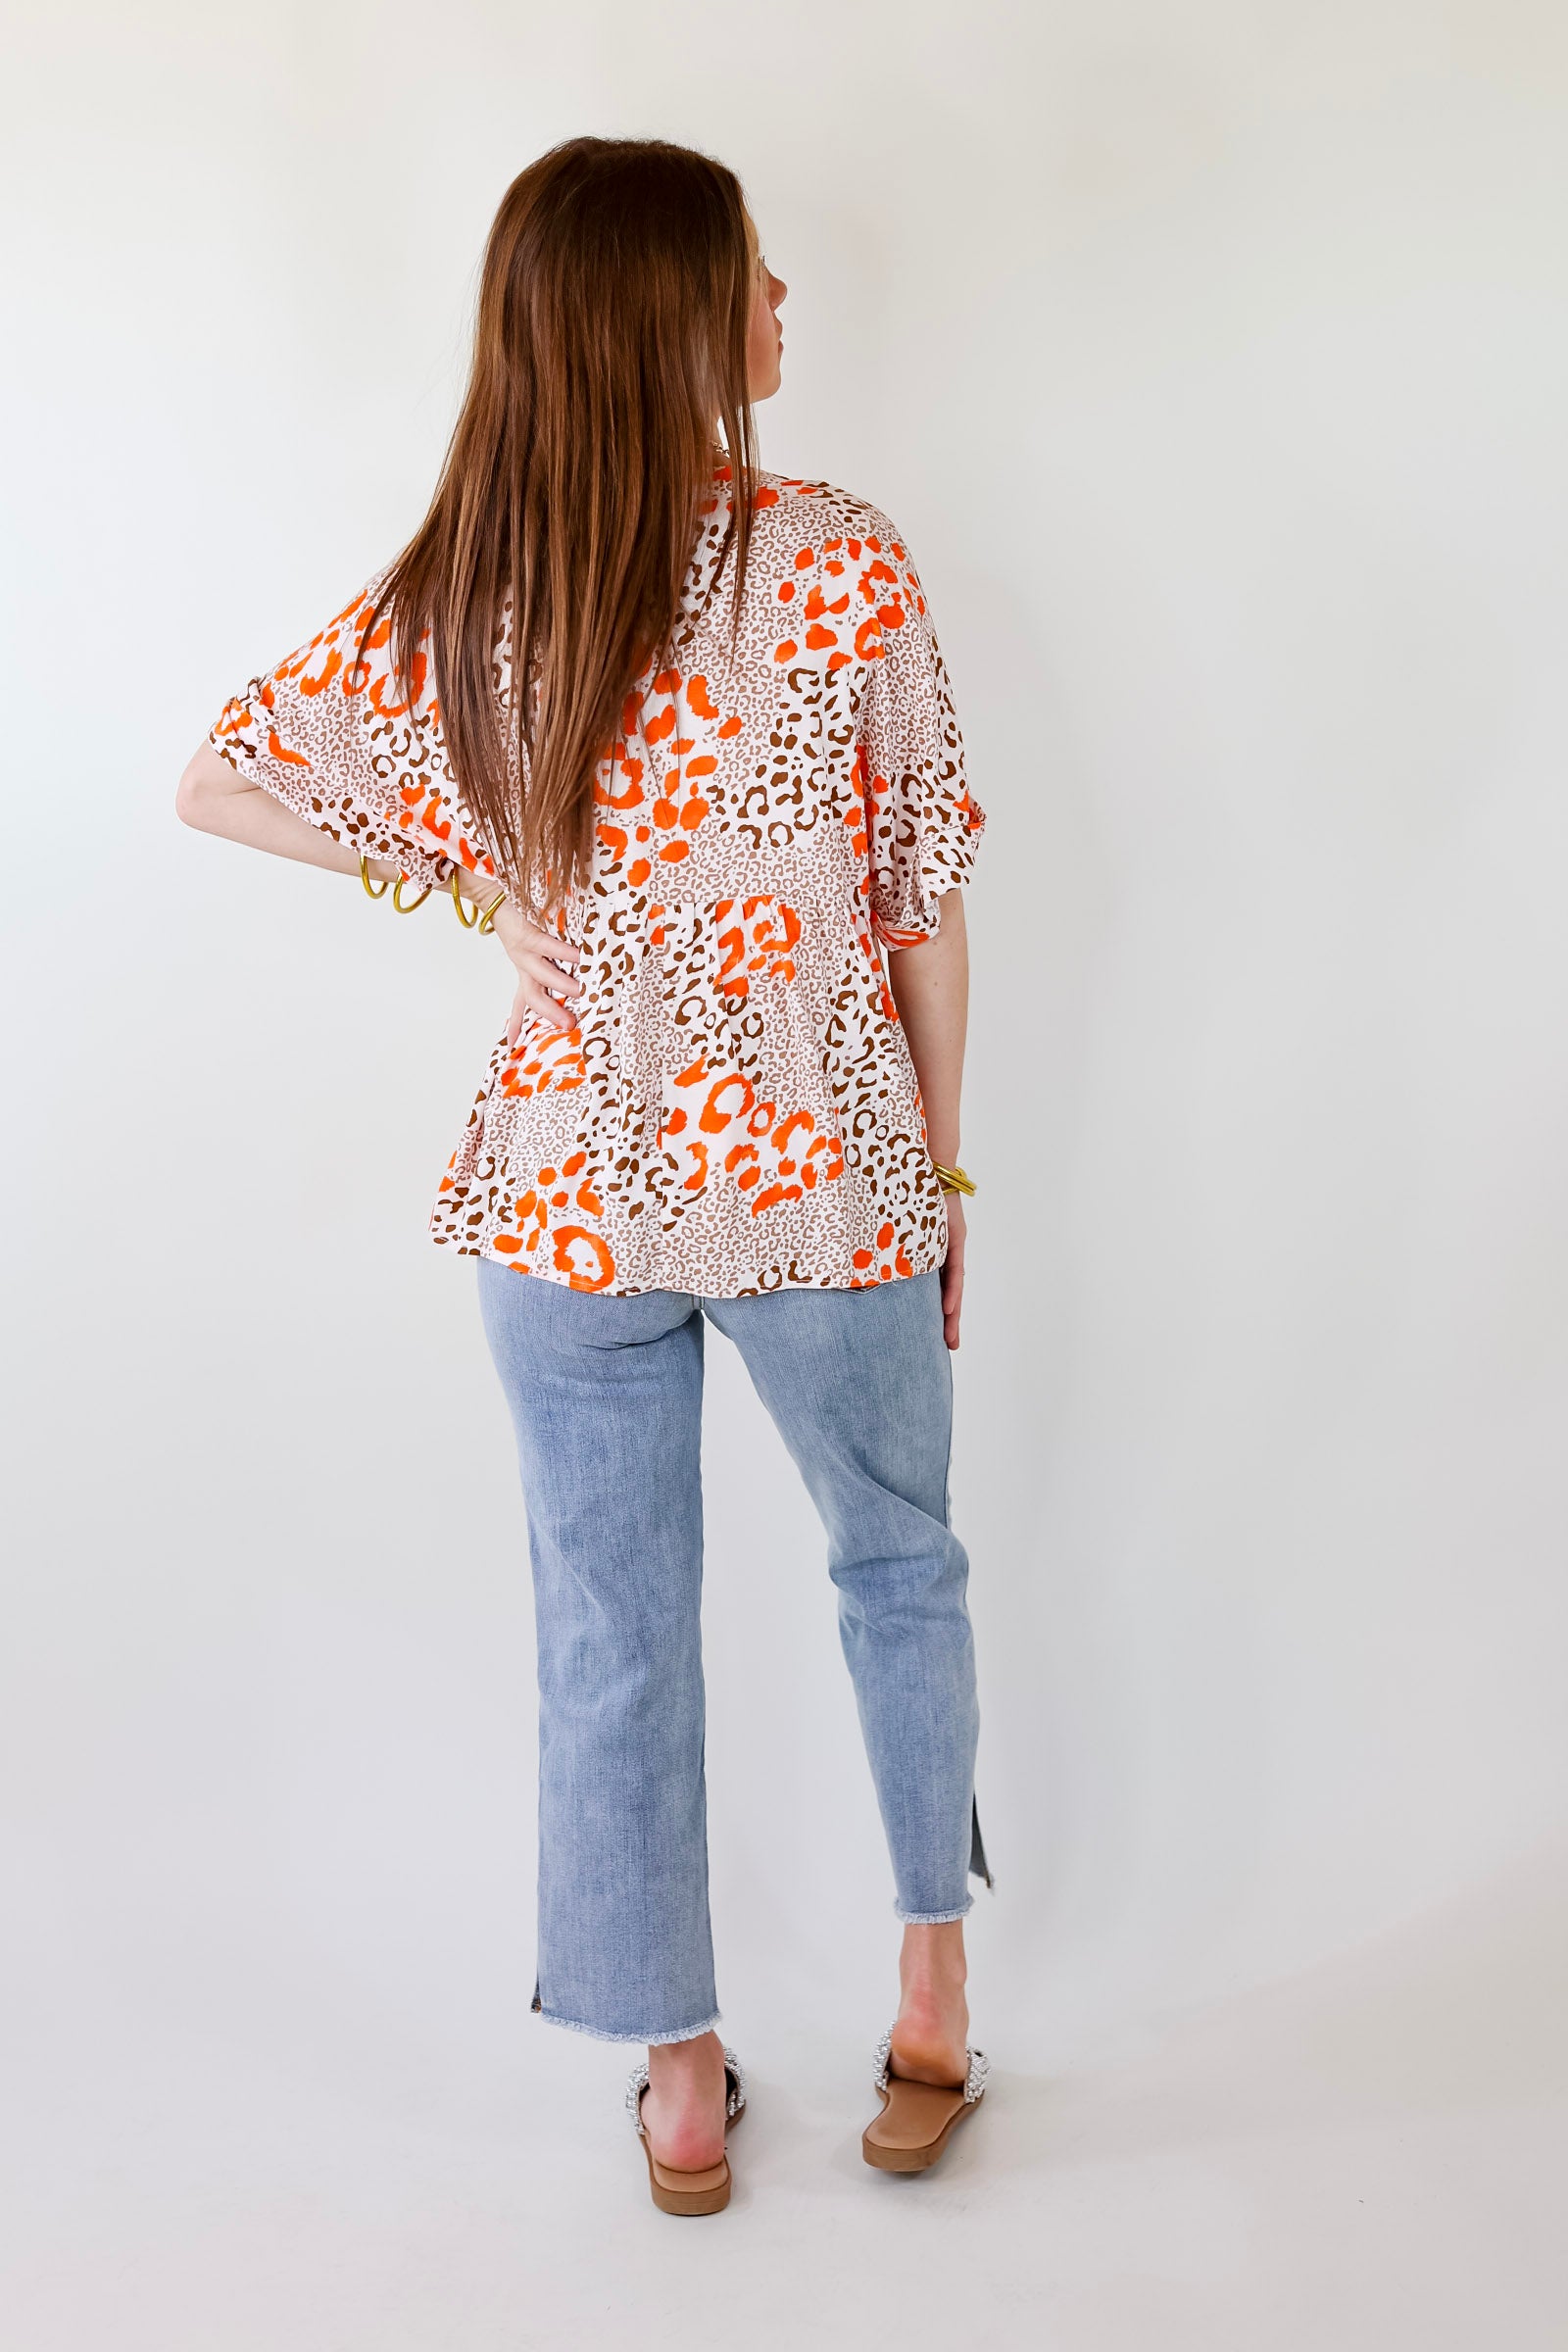 By Chance Leopard Print Top Short Sleeve Top with Floral Embroidery in Ivory - Giddy Up Glamour Boutique